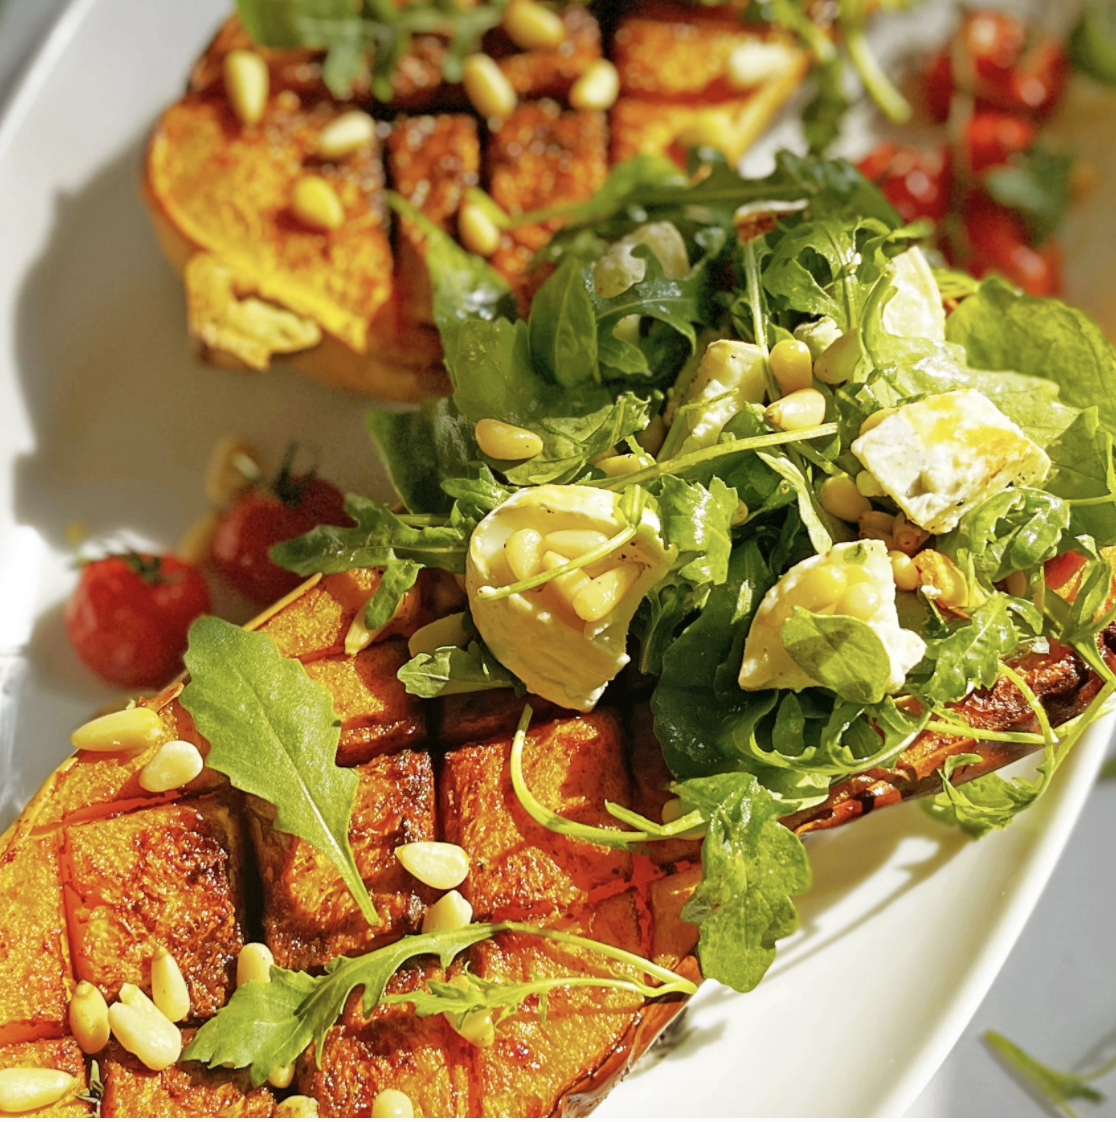 Image of Roasted Butternut Squash with Goats Cheese & Rocket